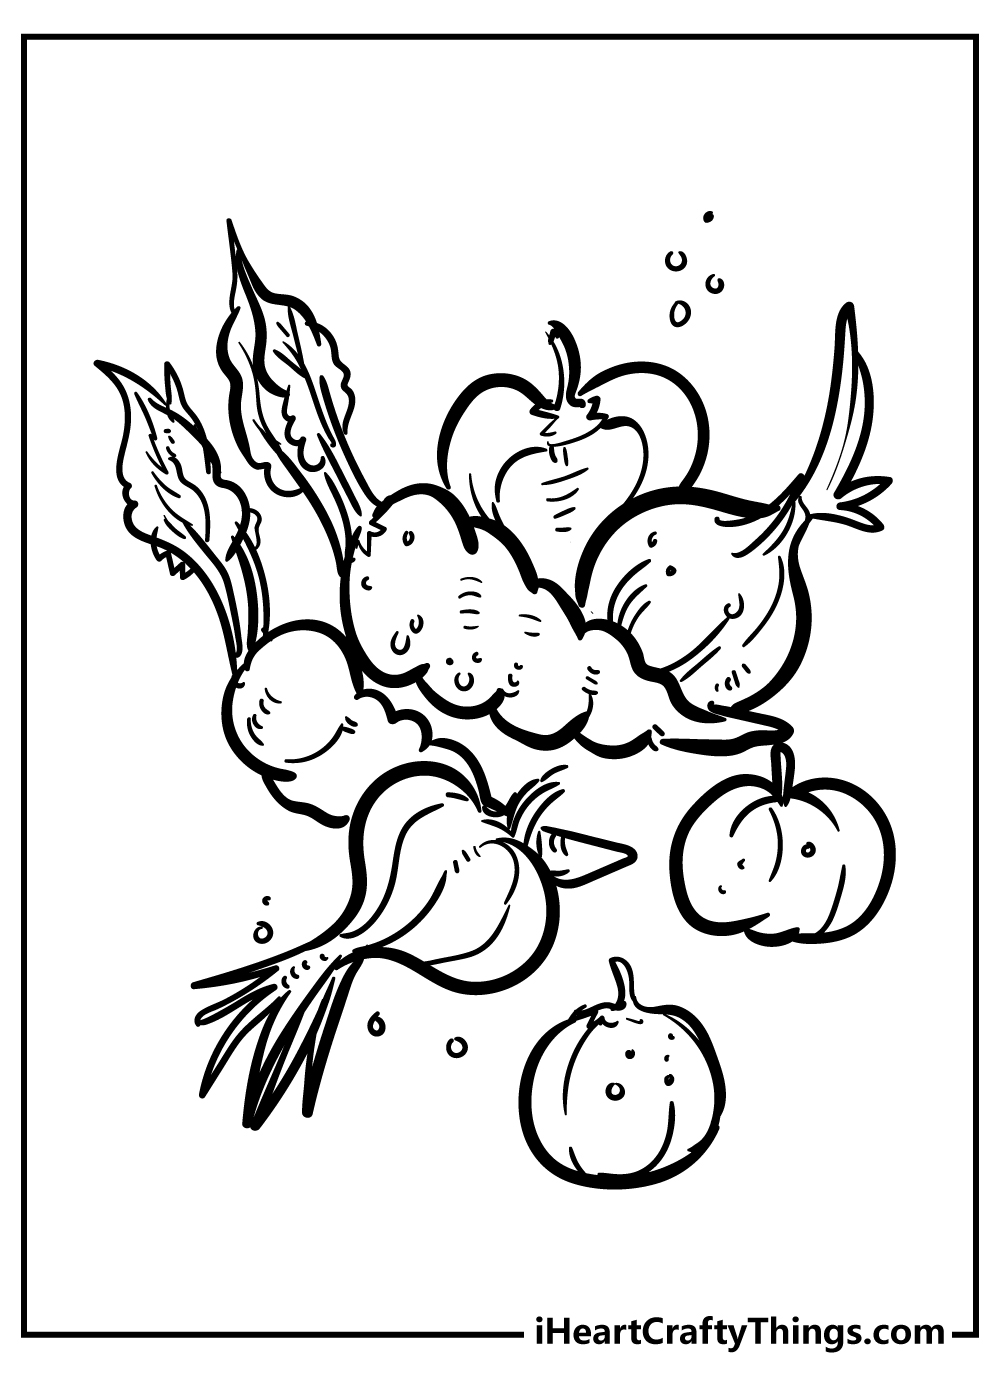 Vegetables Coloring Book for adults free download